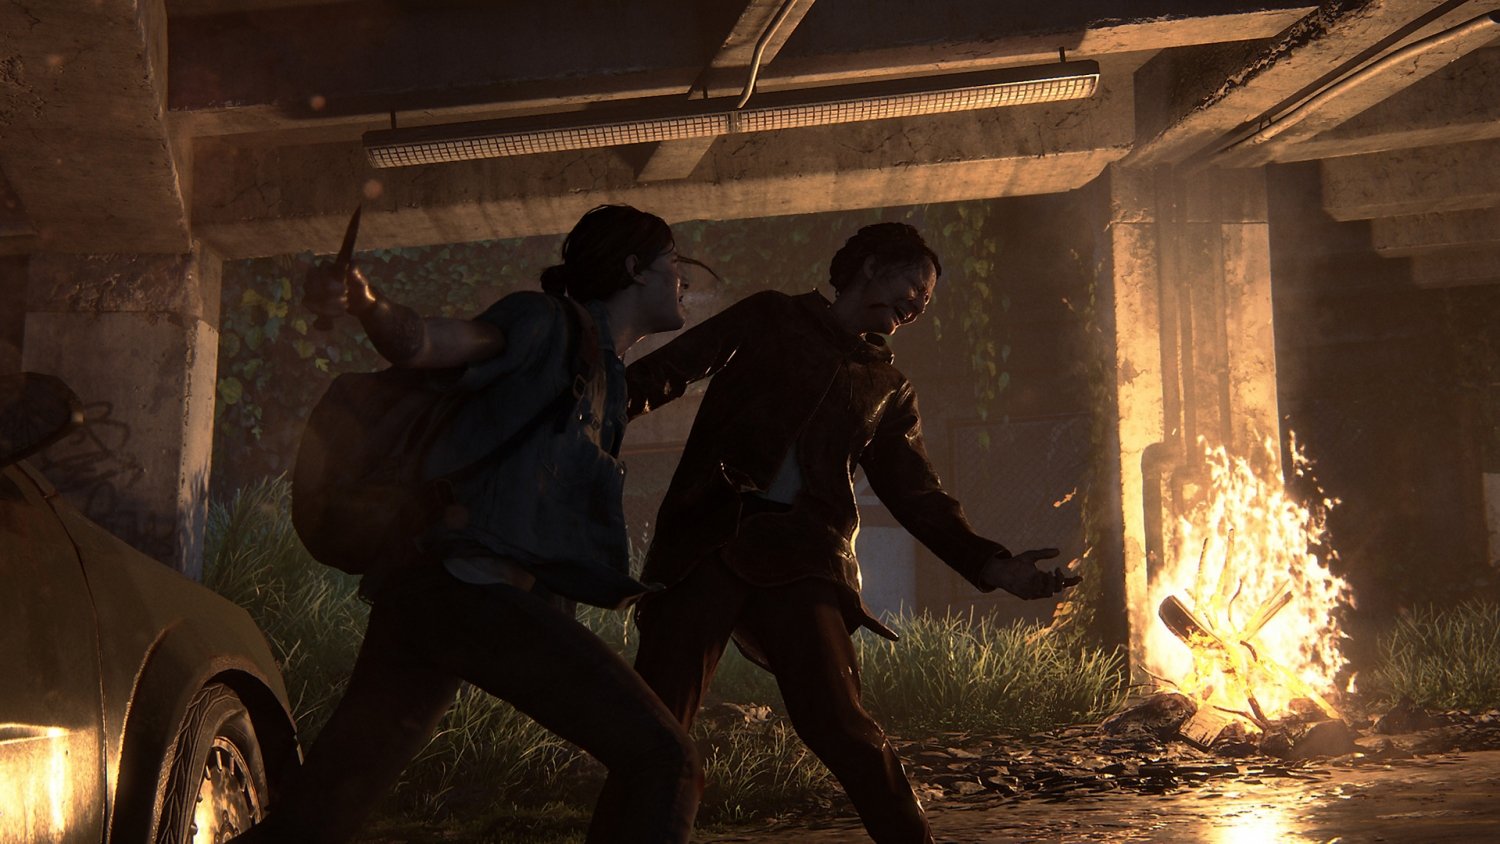 Crunch once again in the spotlight after damning report on The Last of Us 2  developer Naughty Dog